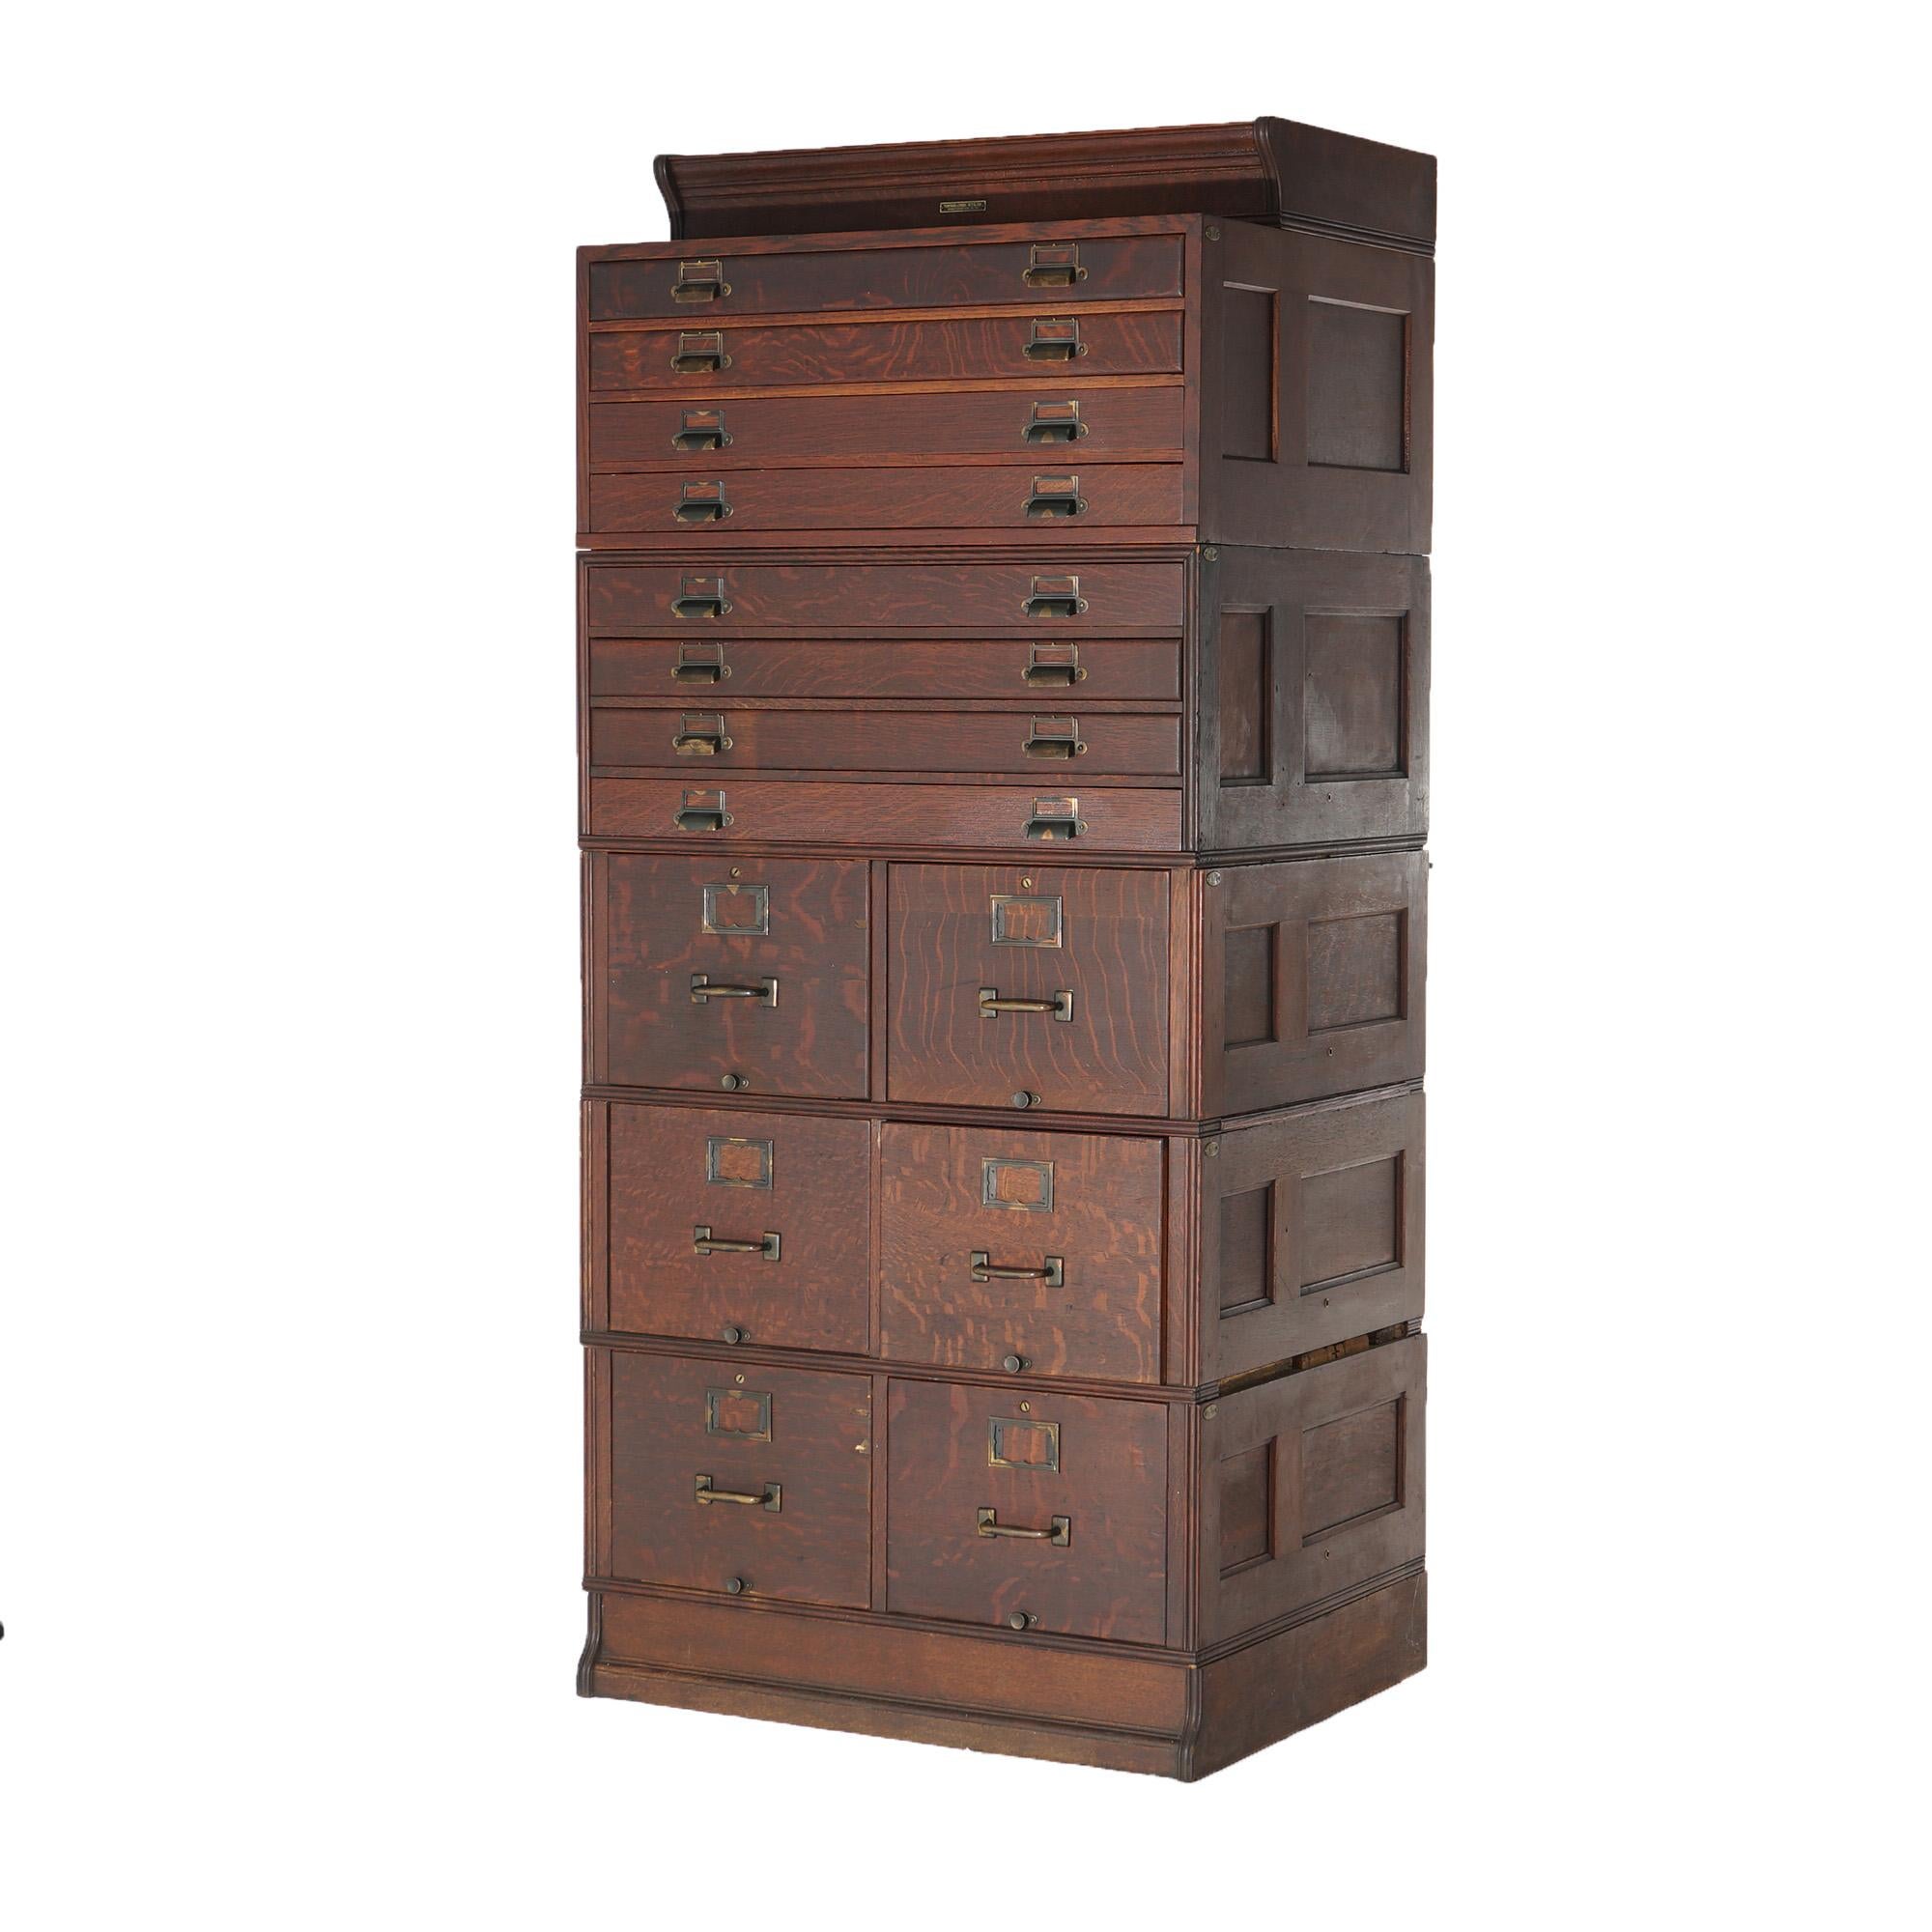 An antique Arts and Crafts filing cabinet by Yawman and Erbe offers quarter sawn oak paneled construction with five stacks having file and map drawers, c1910

Measures - 74